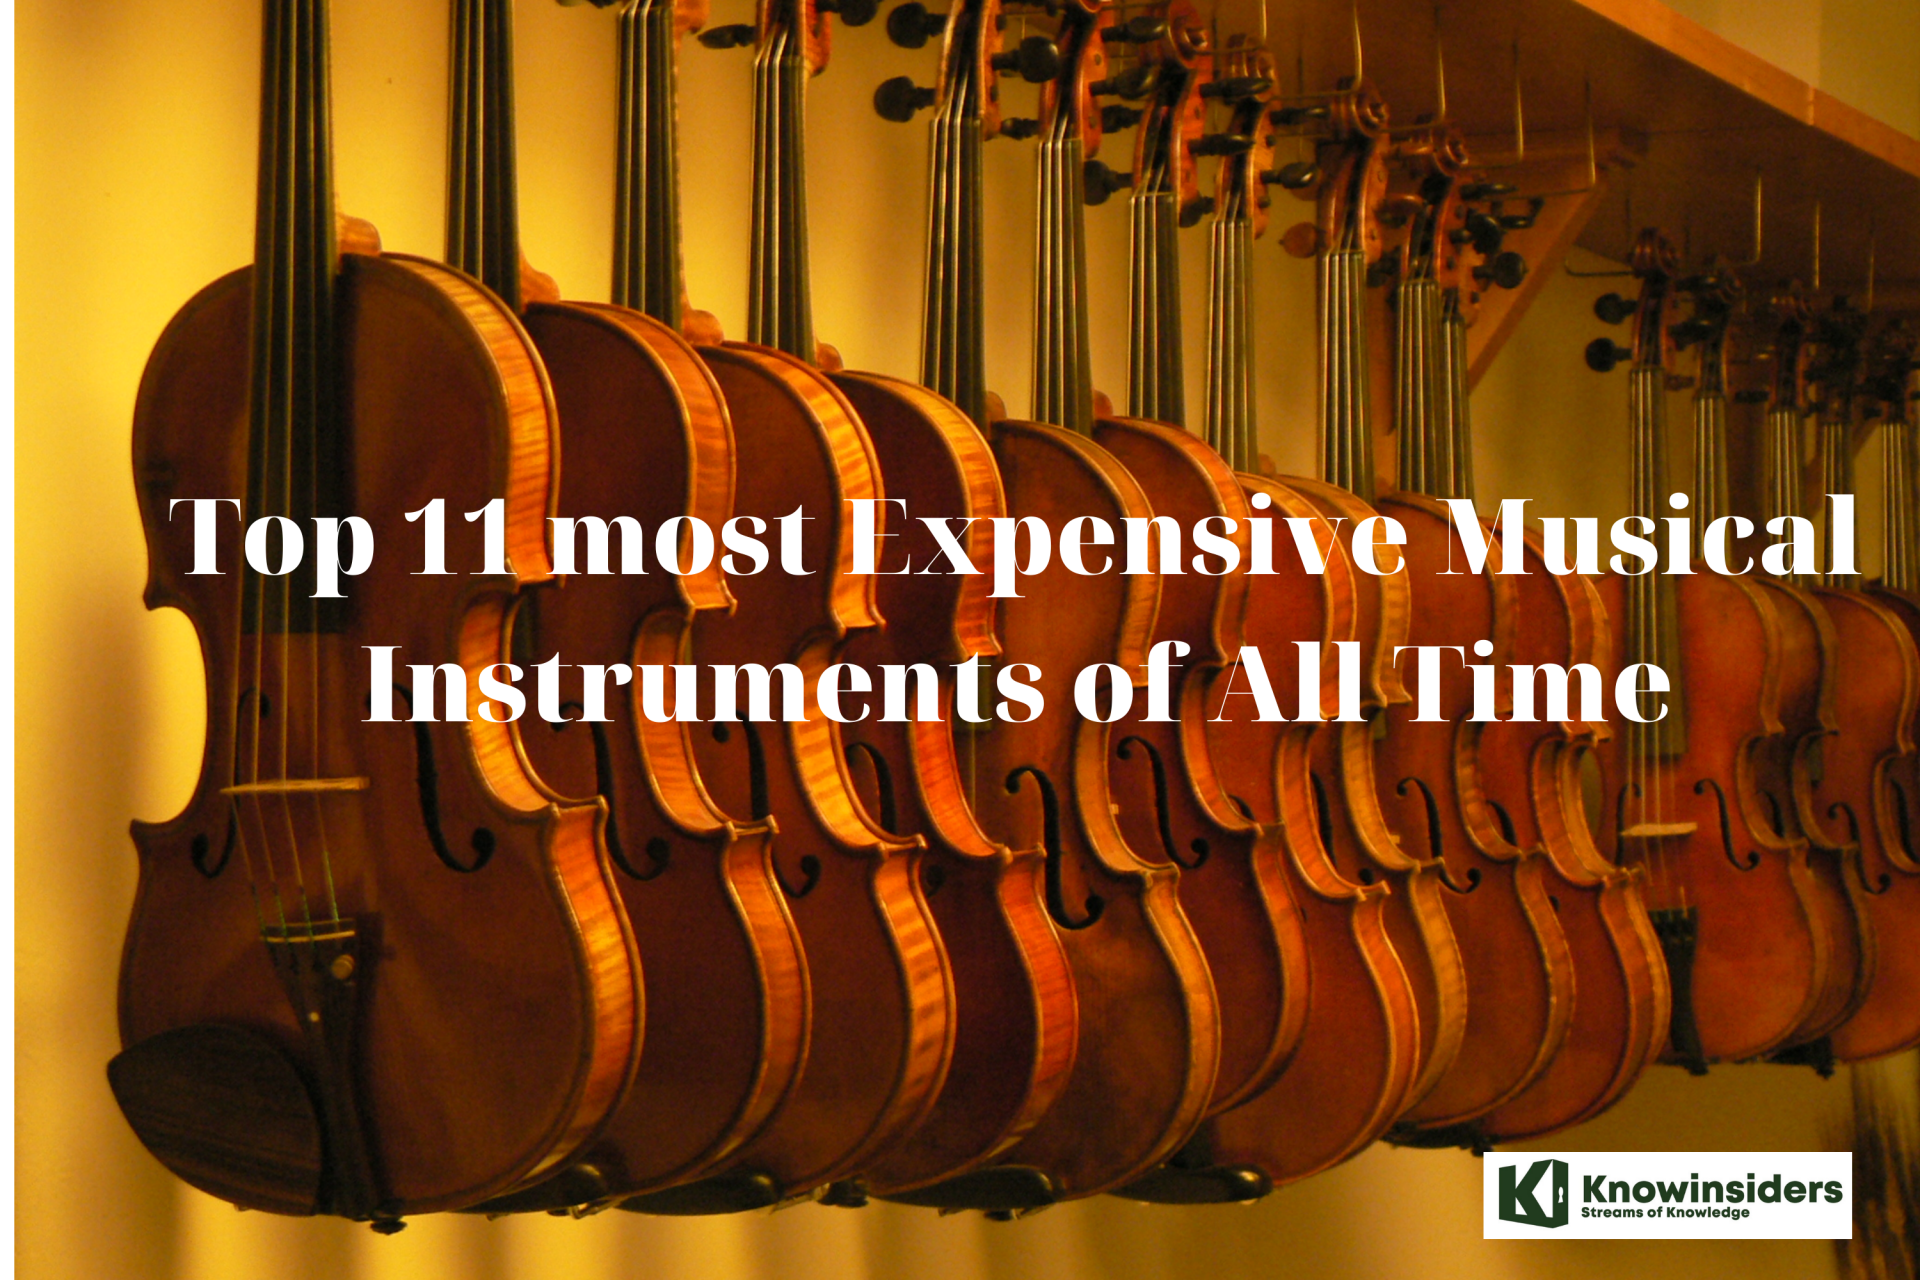 Top 11 most Expensive Musical Instruments of All Time